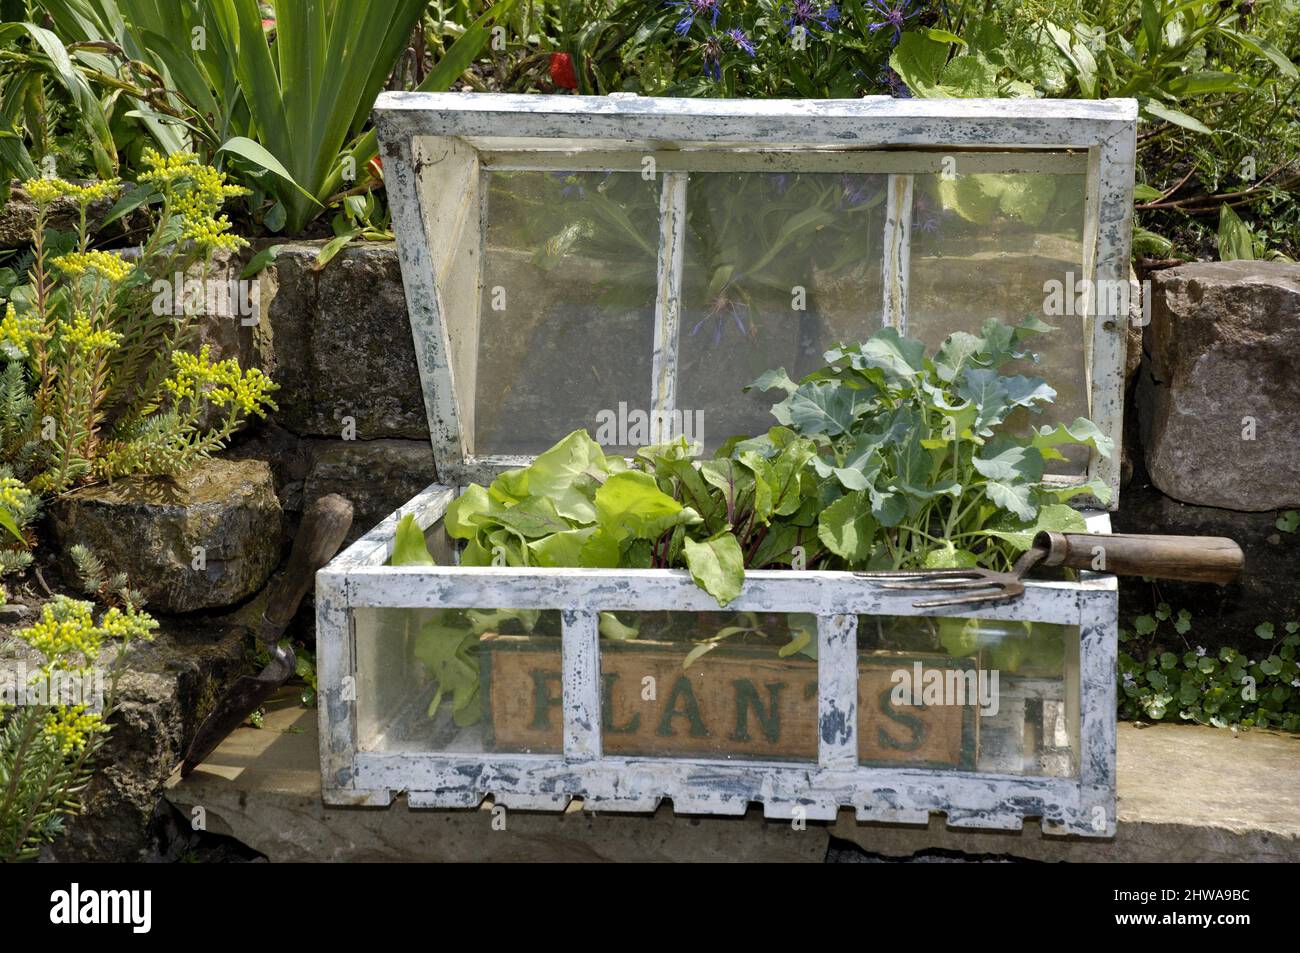 Young vegetable plants in a cold frame Stock Photo